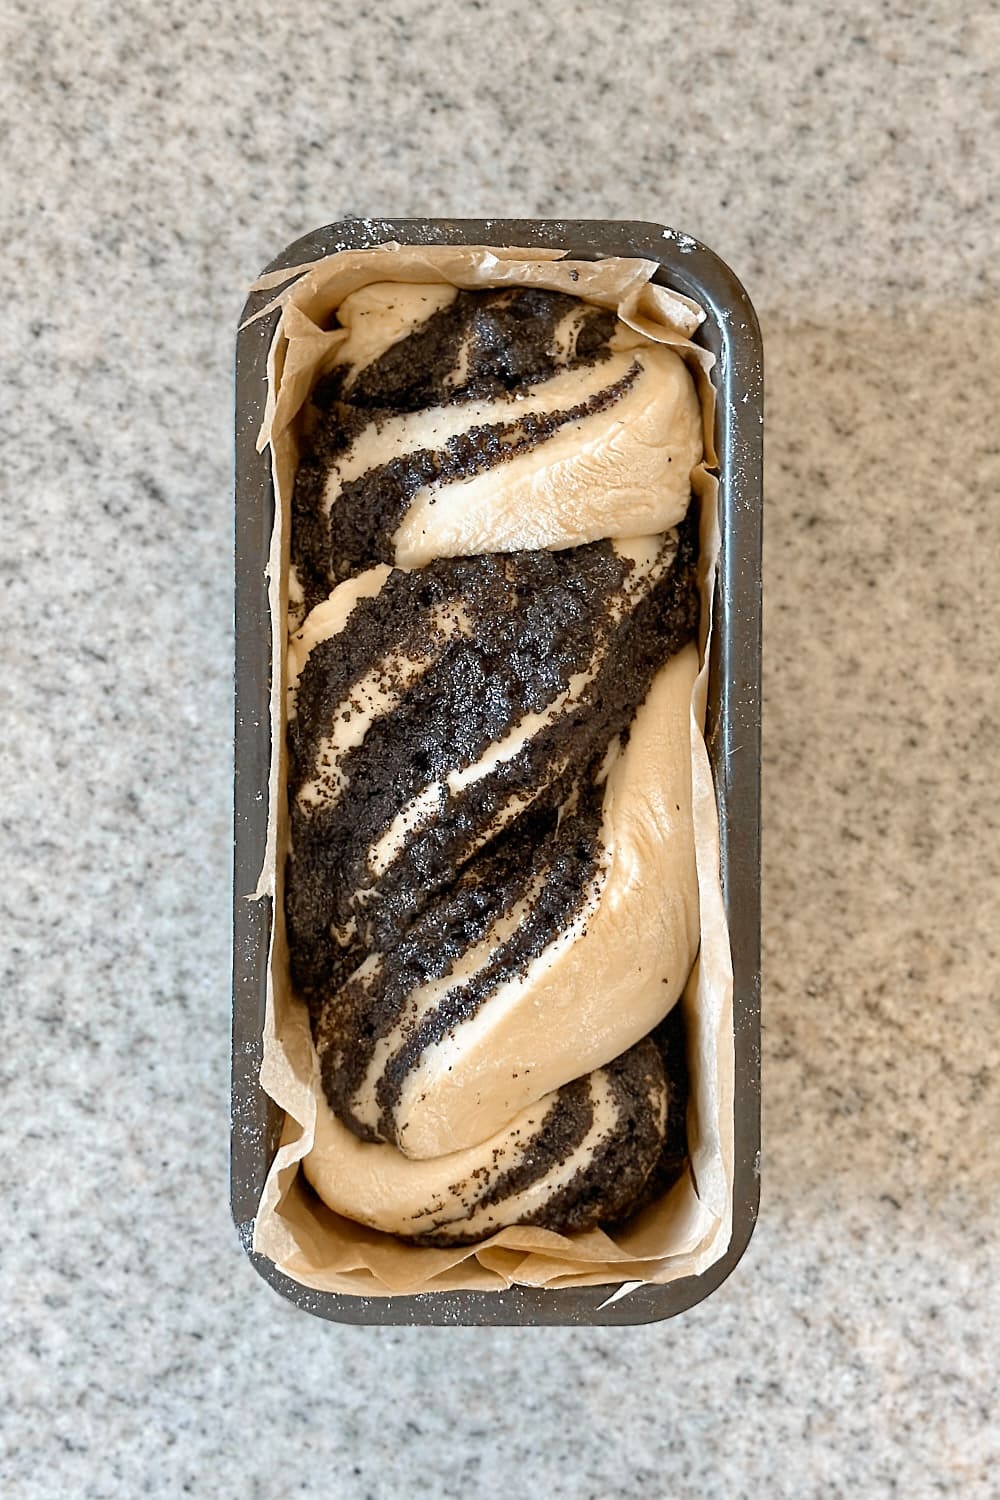 Placing the shaped babka in a loaf pan lined with parchment paper.